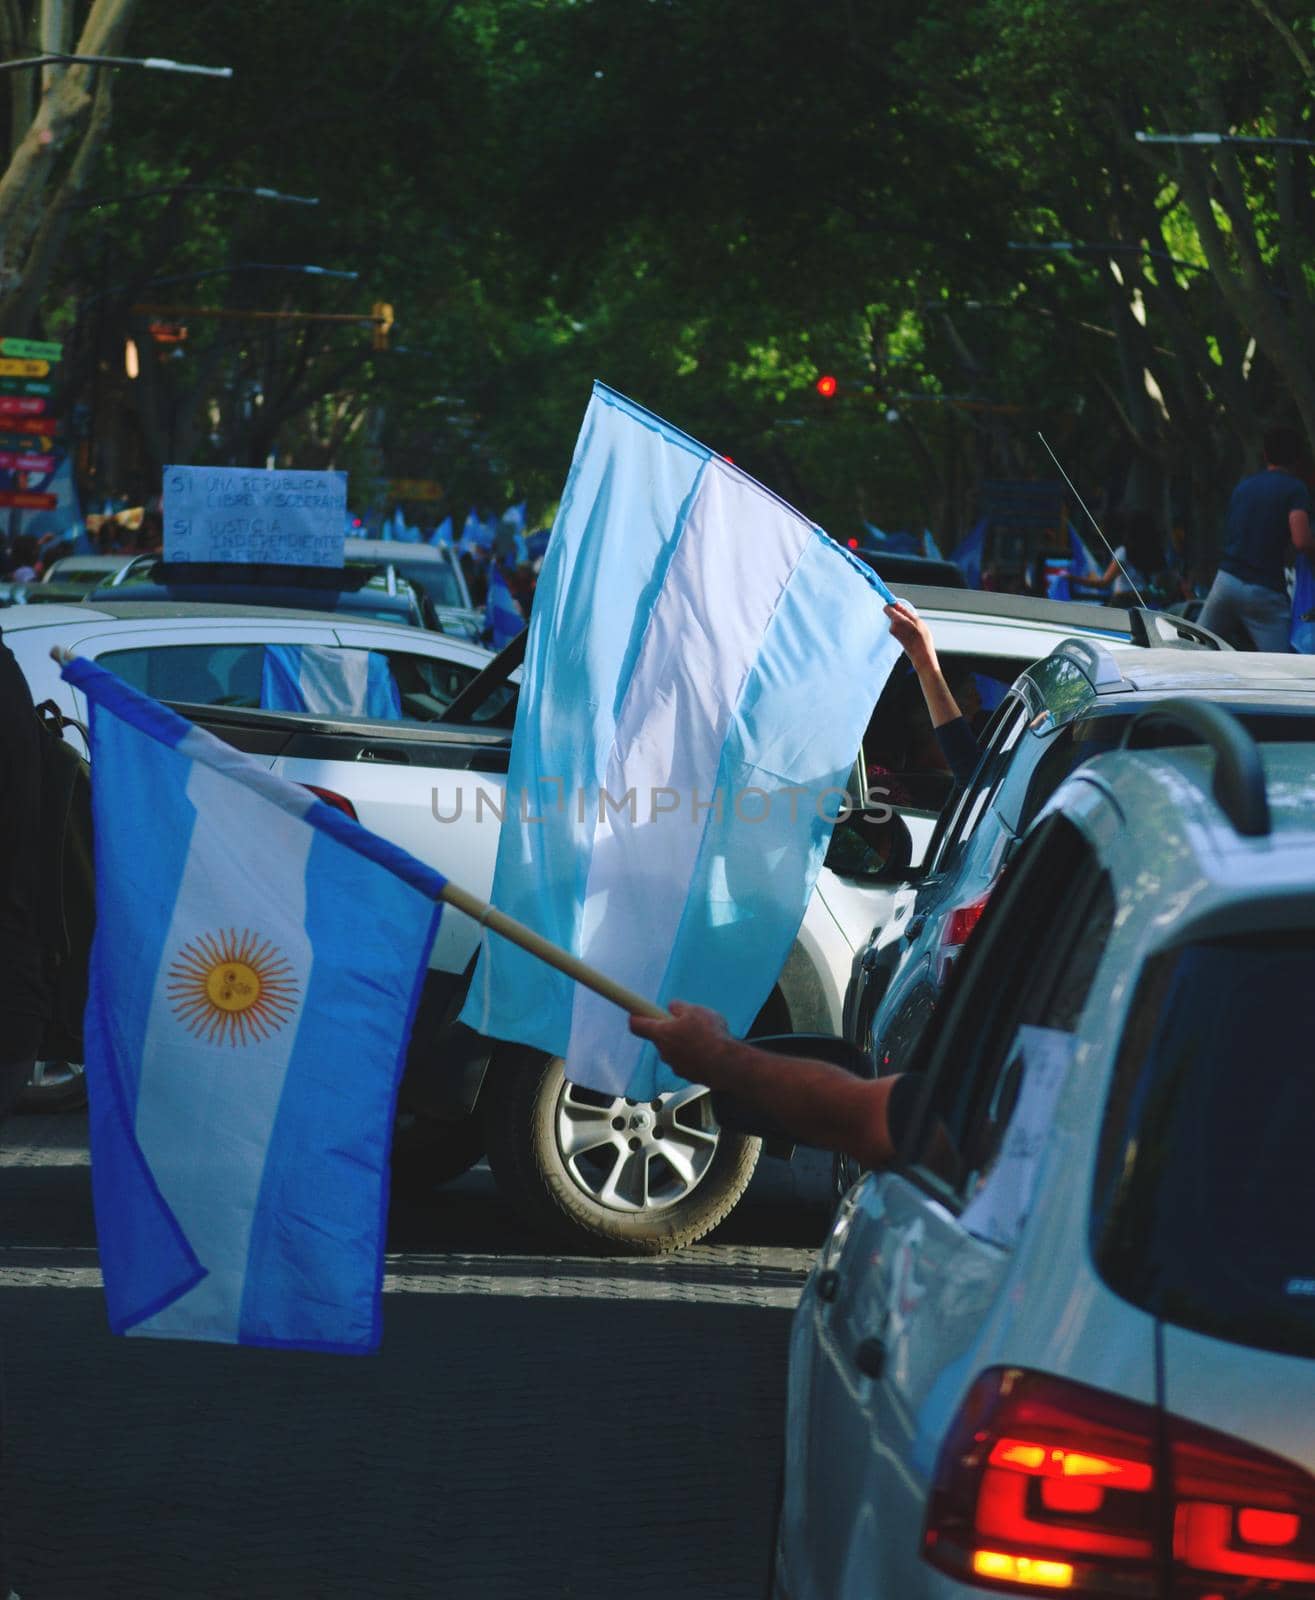 2020-10-12, Mendoza, Argentina: A man holds an argentinian flag from his car during a protest against the national government. by hernan_hyper